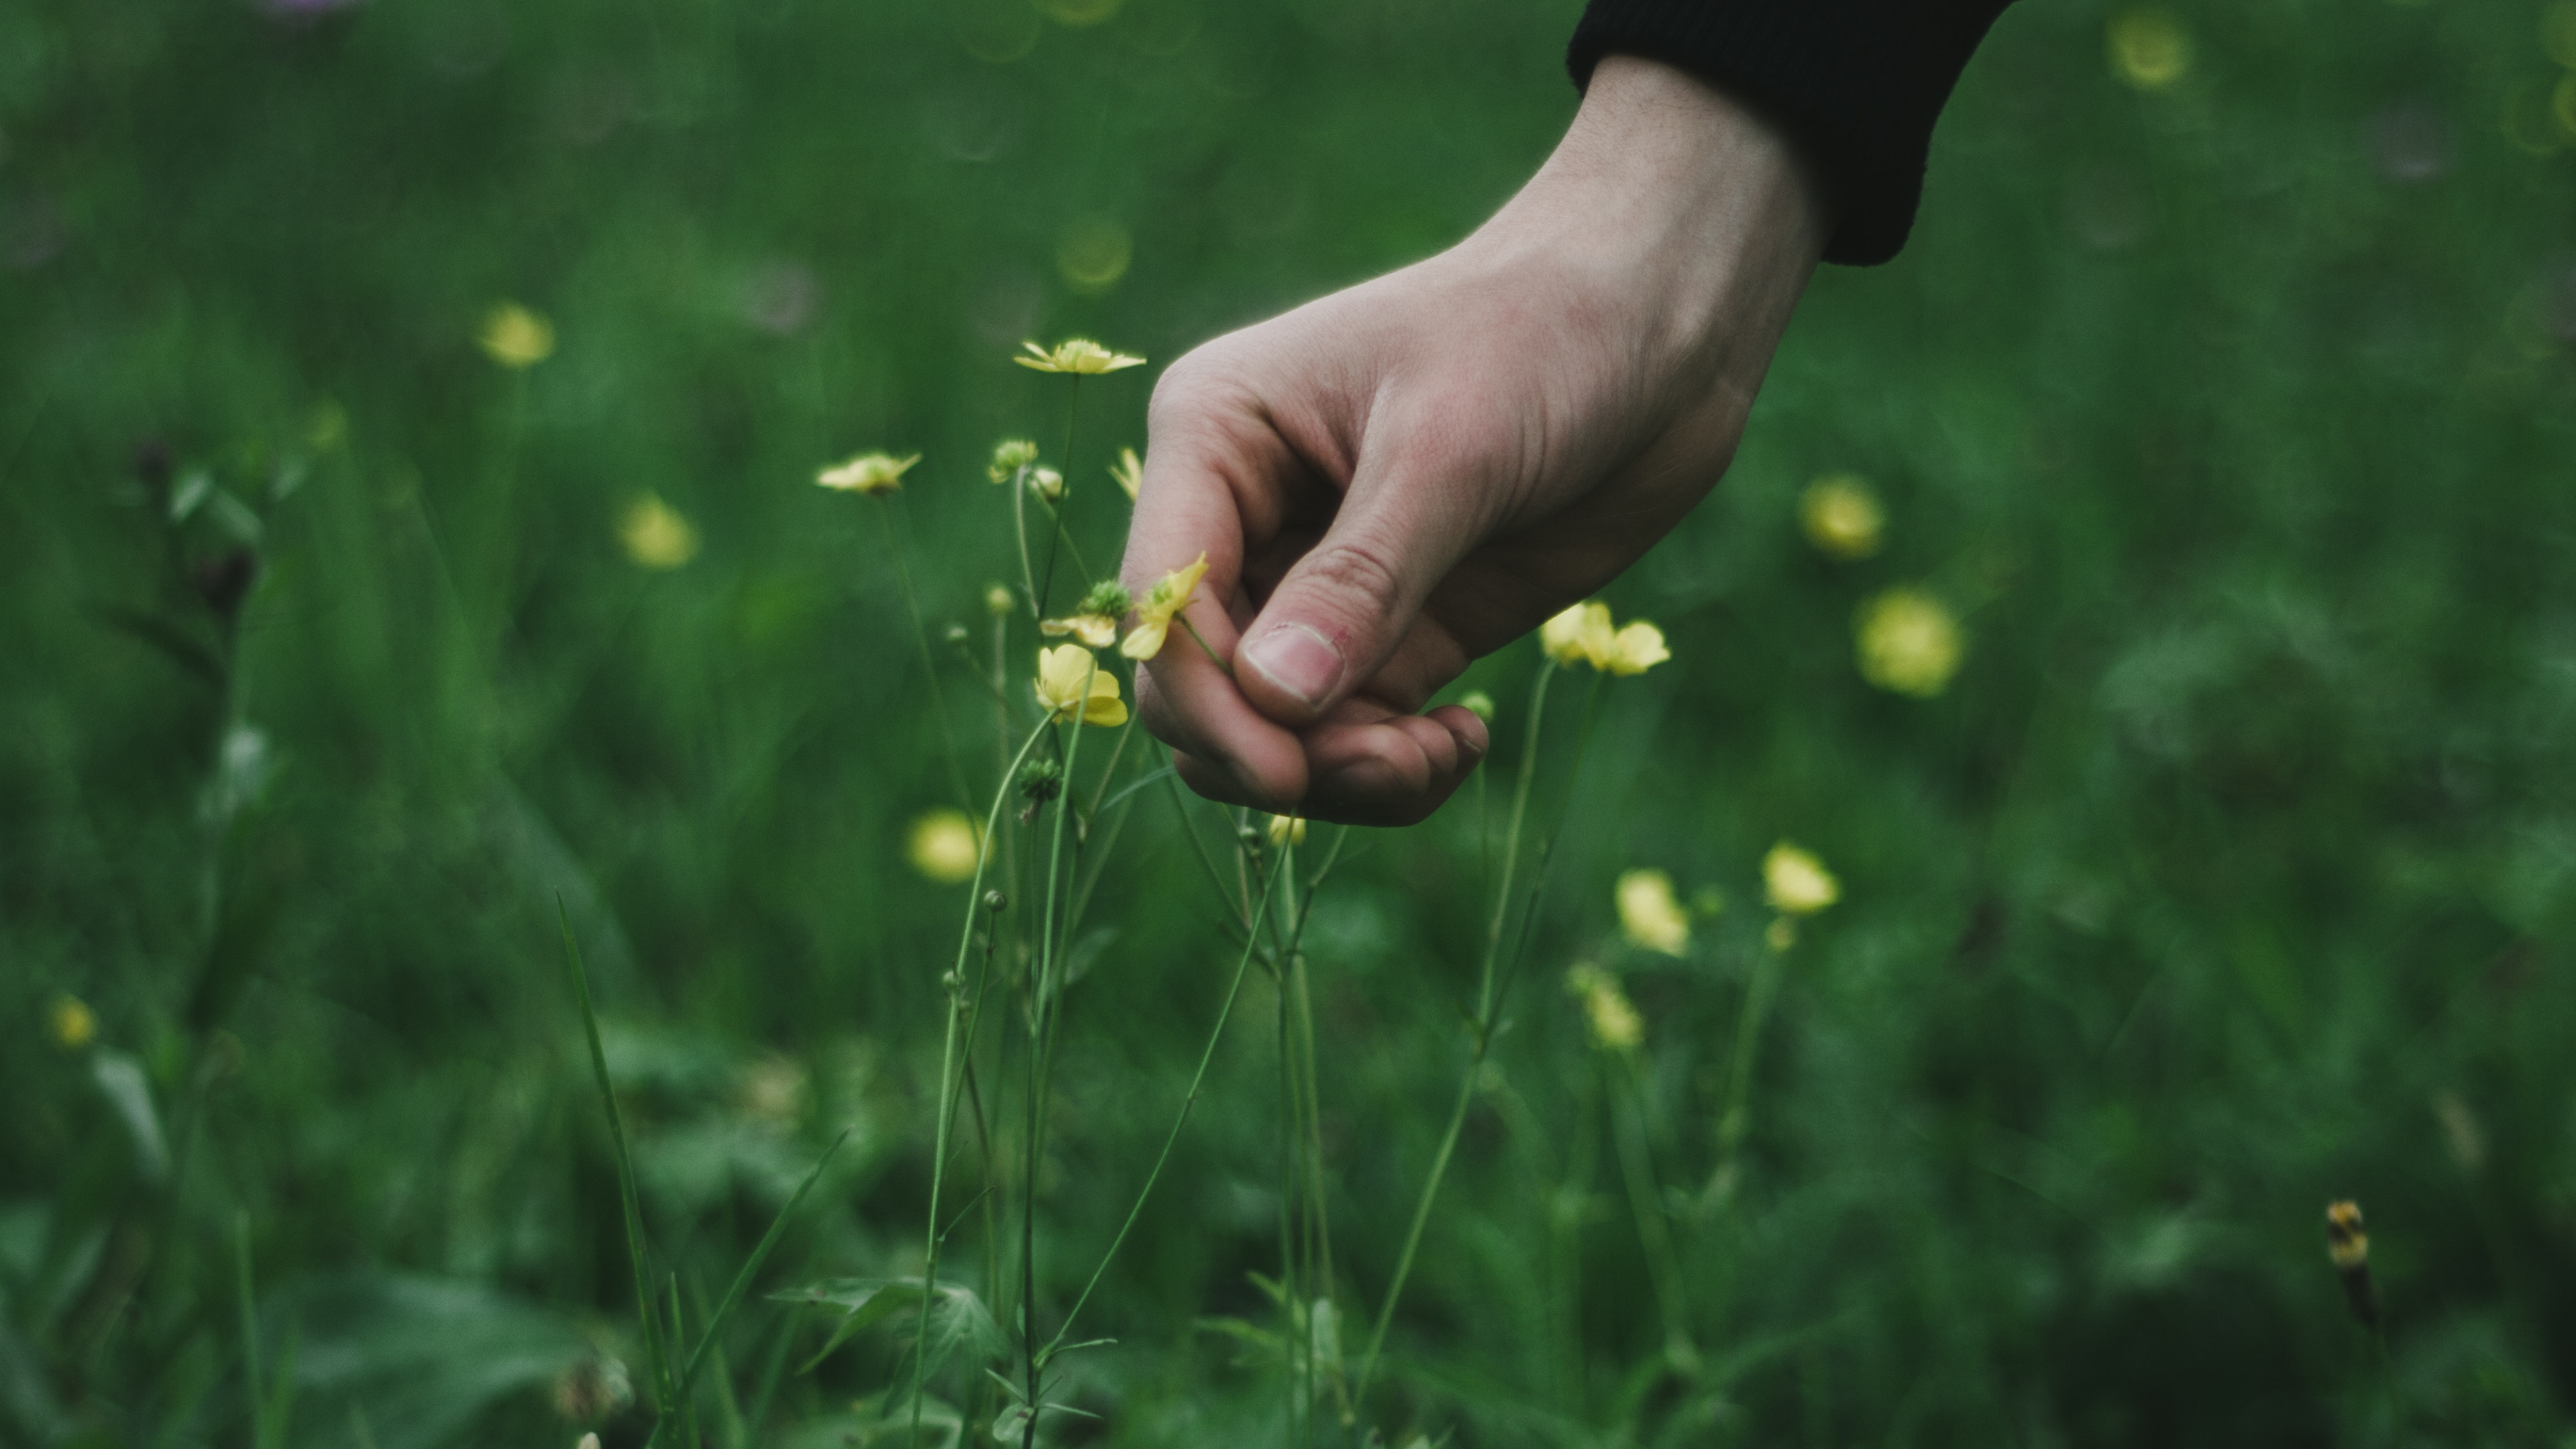 Person Holding Yellow Flower During Daytime. Wallpaper in 3840x2160 Resolution